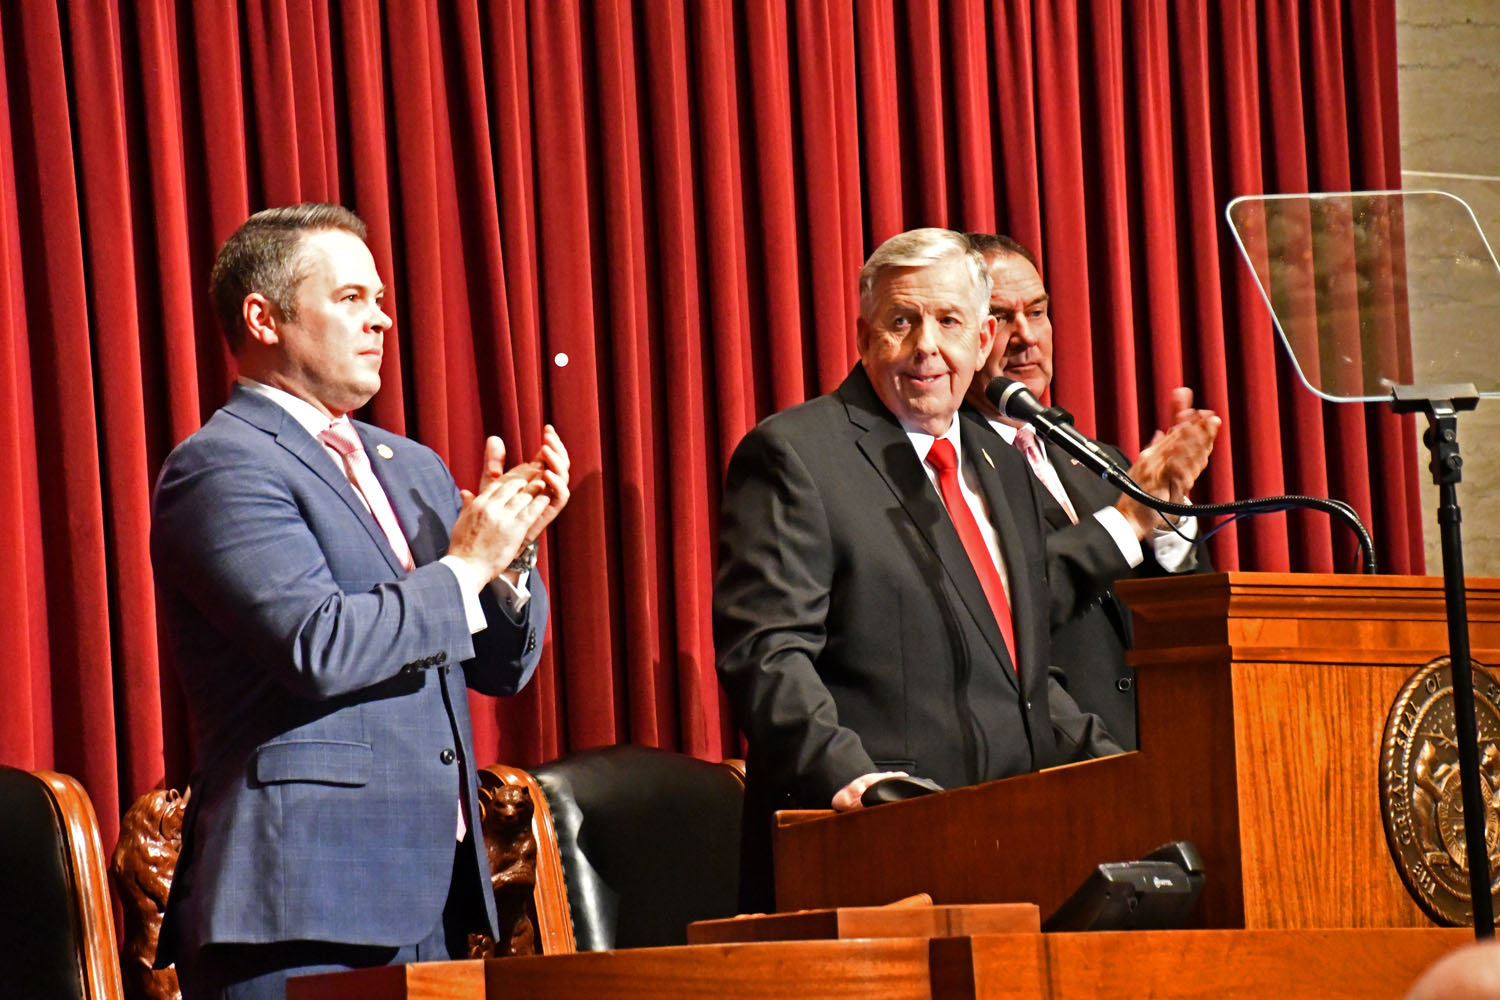 Gov. Mike Parson recommends funding for workforce development initiatives, including MoExcels, during the Jan. 15 State of the State address.